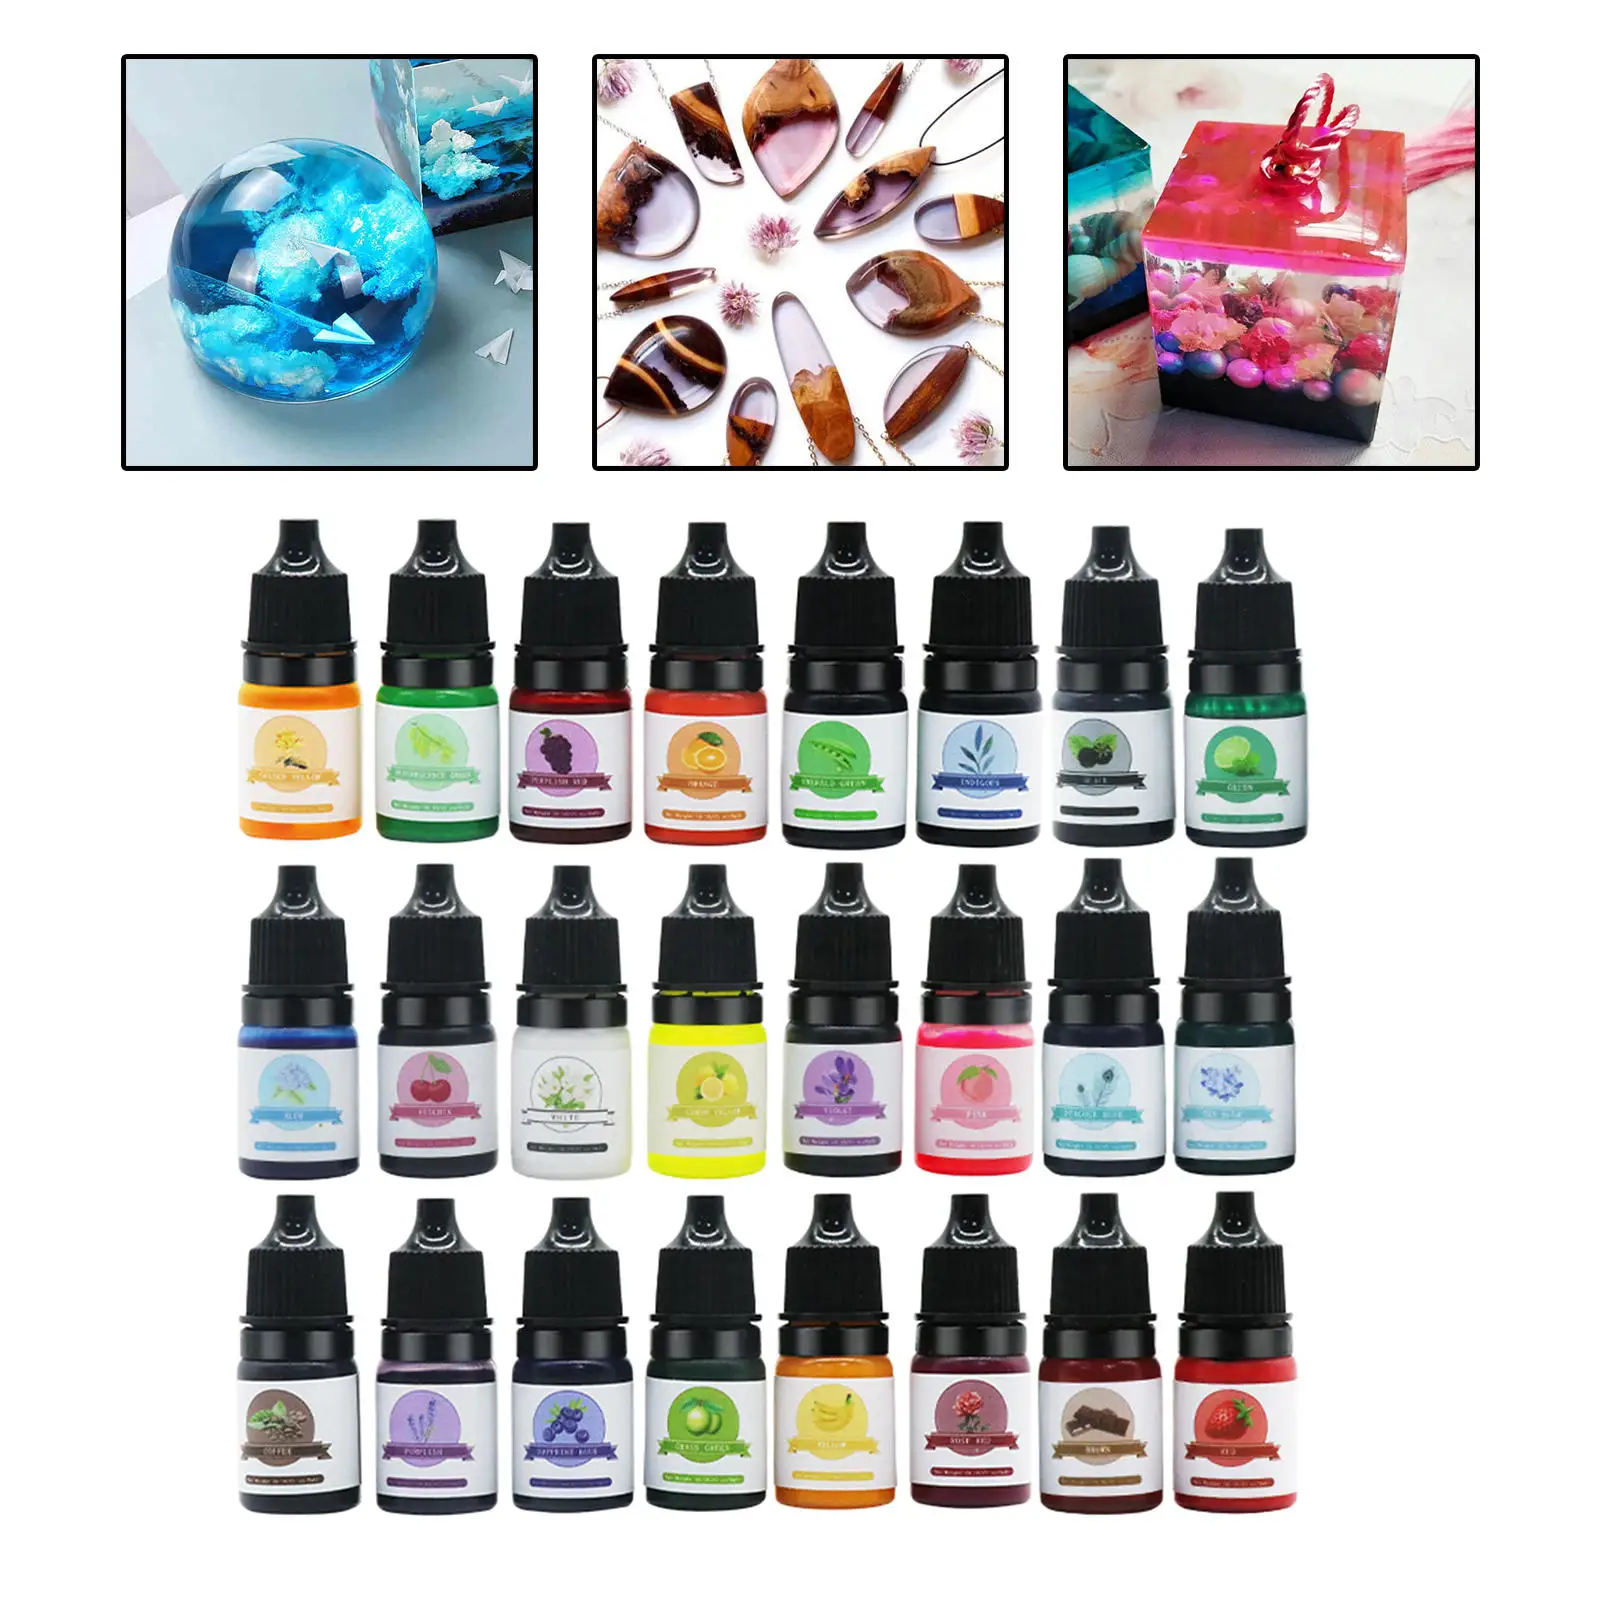 24 Color Epoxy Resin Pigment Jewelry Making Concentrated Resin Coloring Dye Colorant Art Pigment Liquid for DIY Crafts Paint